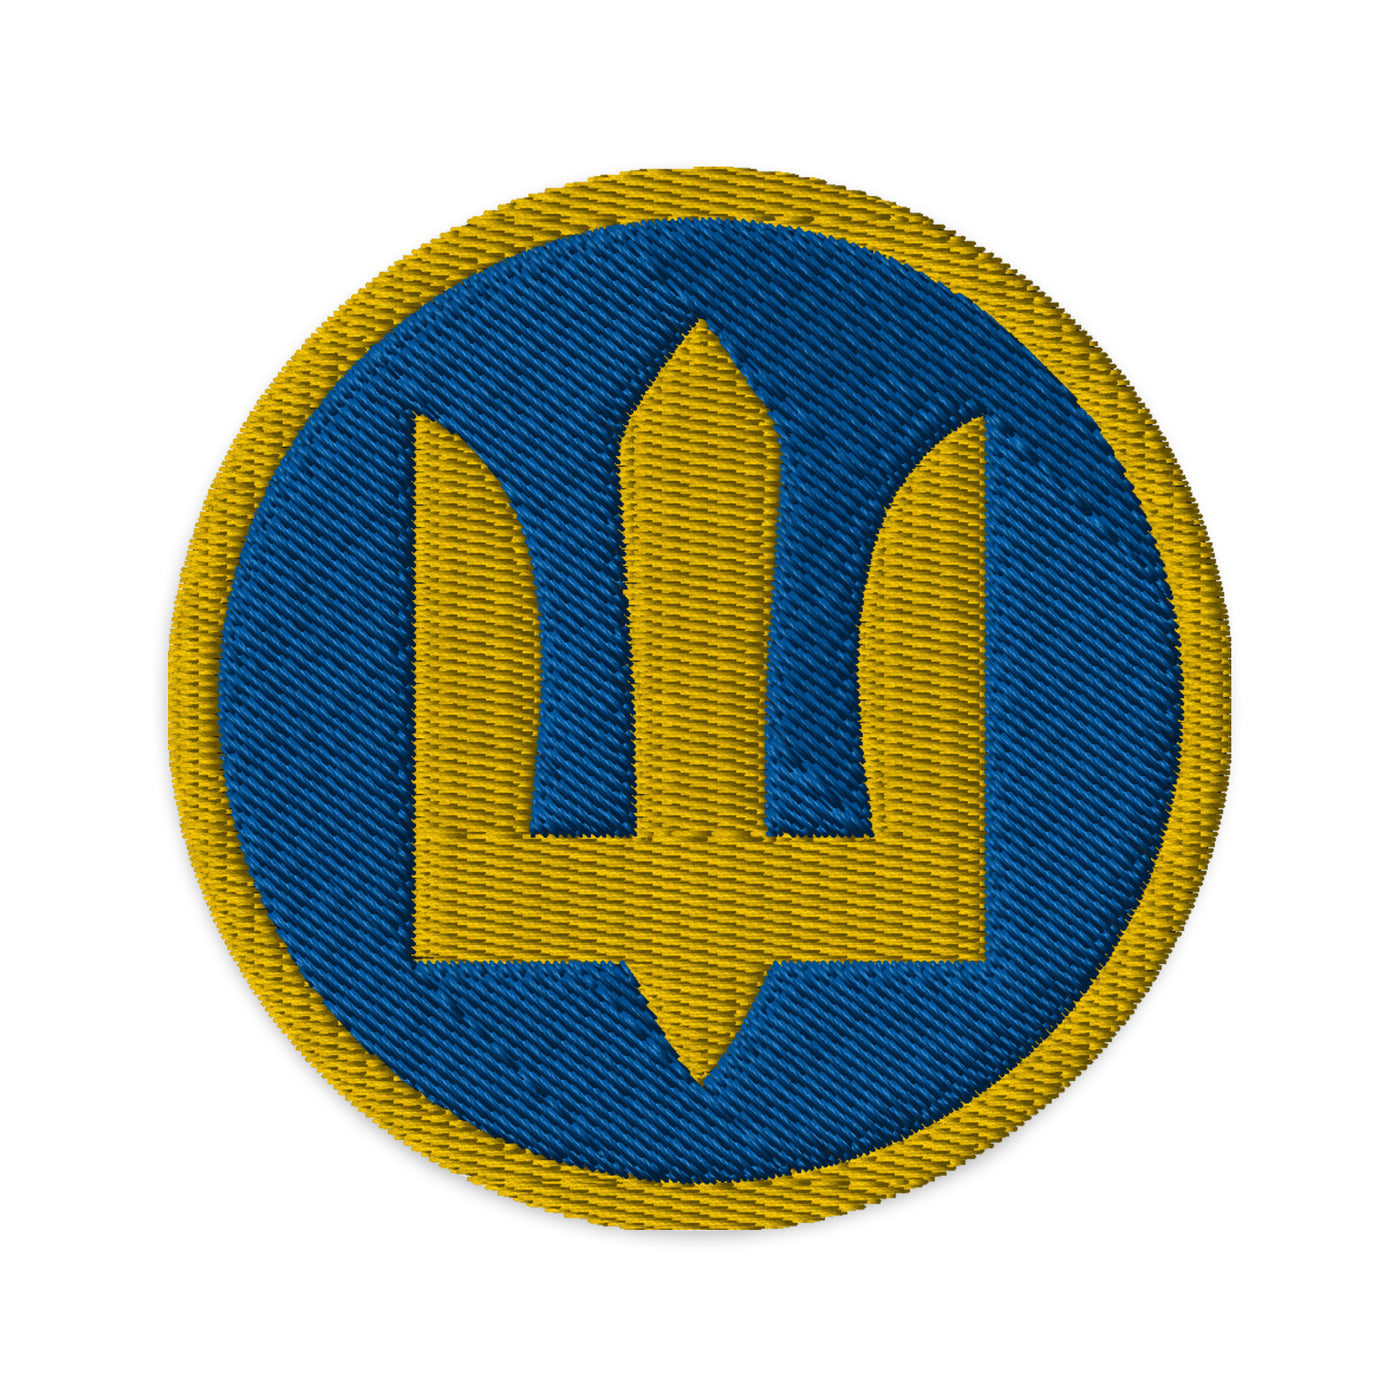 Ukrainian Military Emblem 1 Colored Embroidered Patch